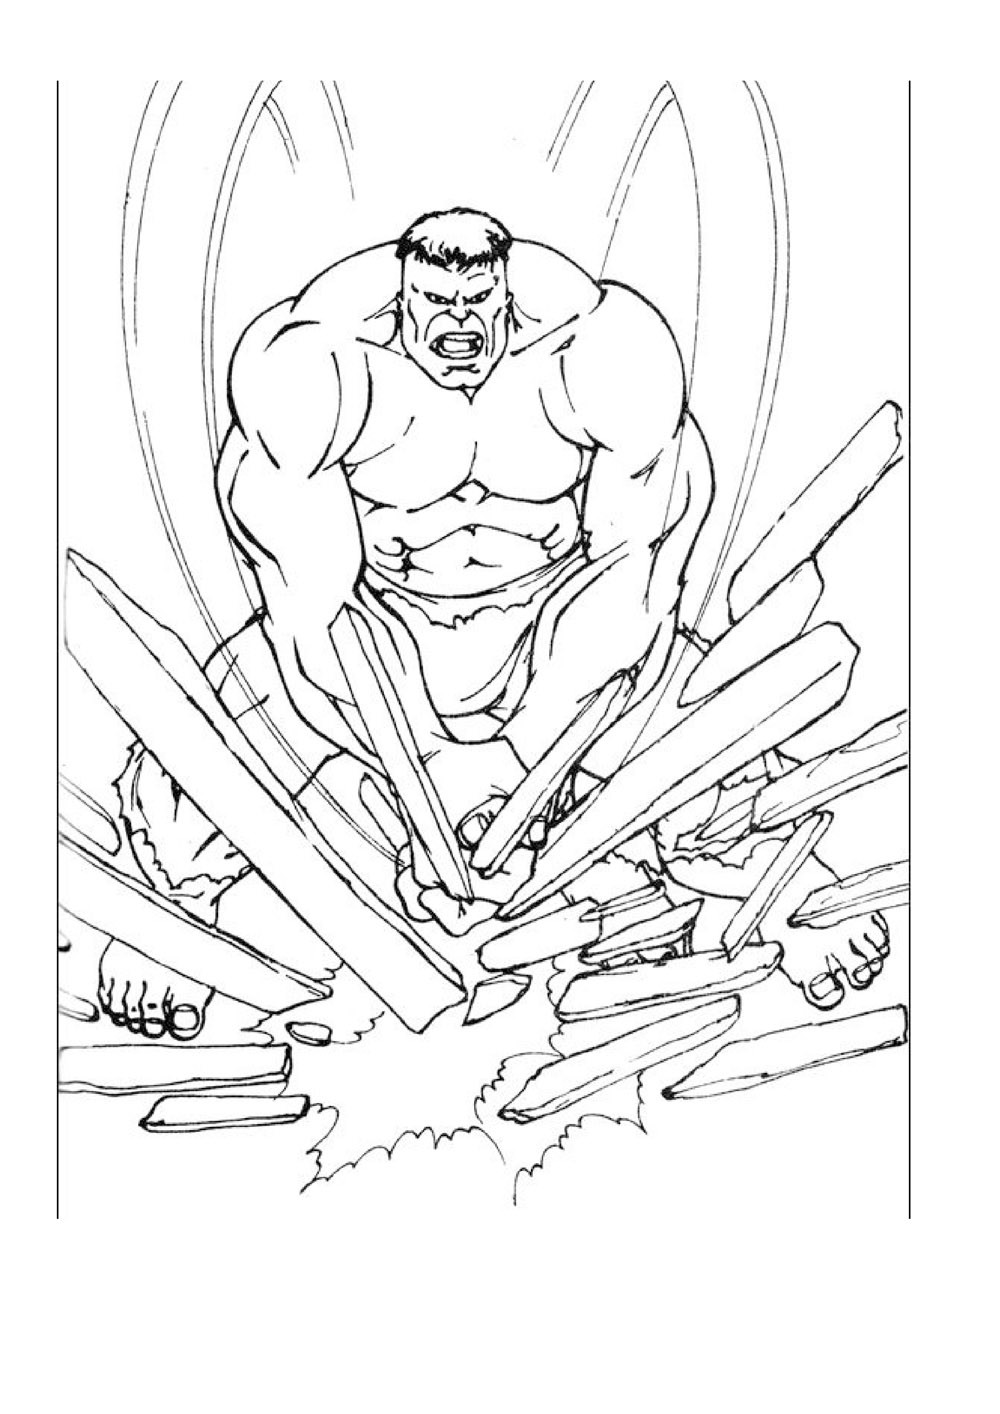 Hulk Coloring Pages For Kids
 Hulk to color for children Hulk Kids Coloring Pages